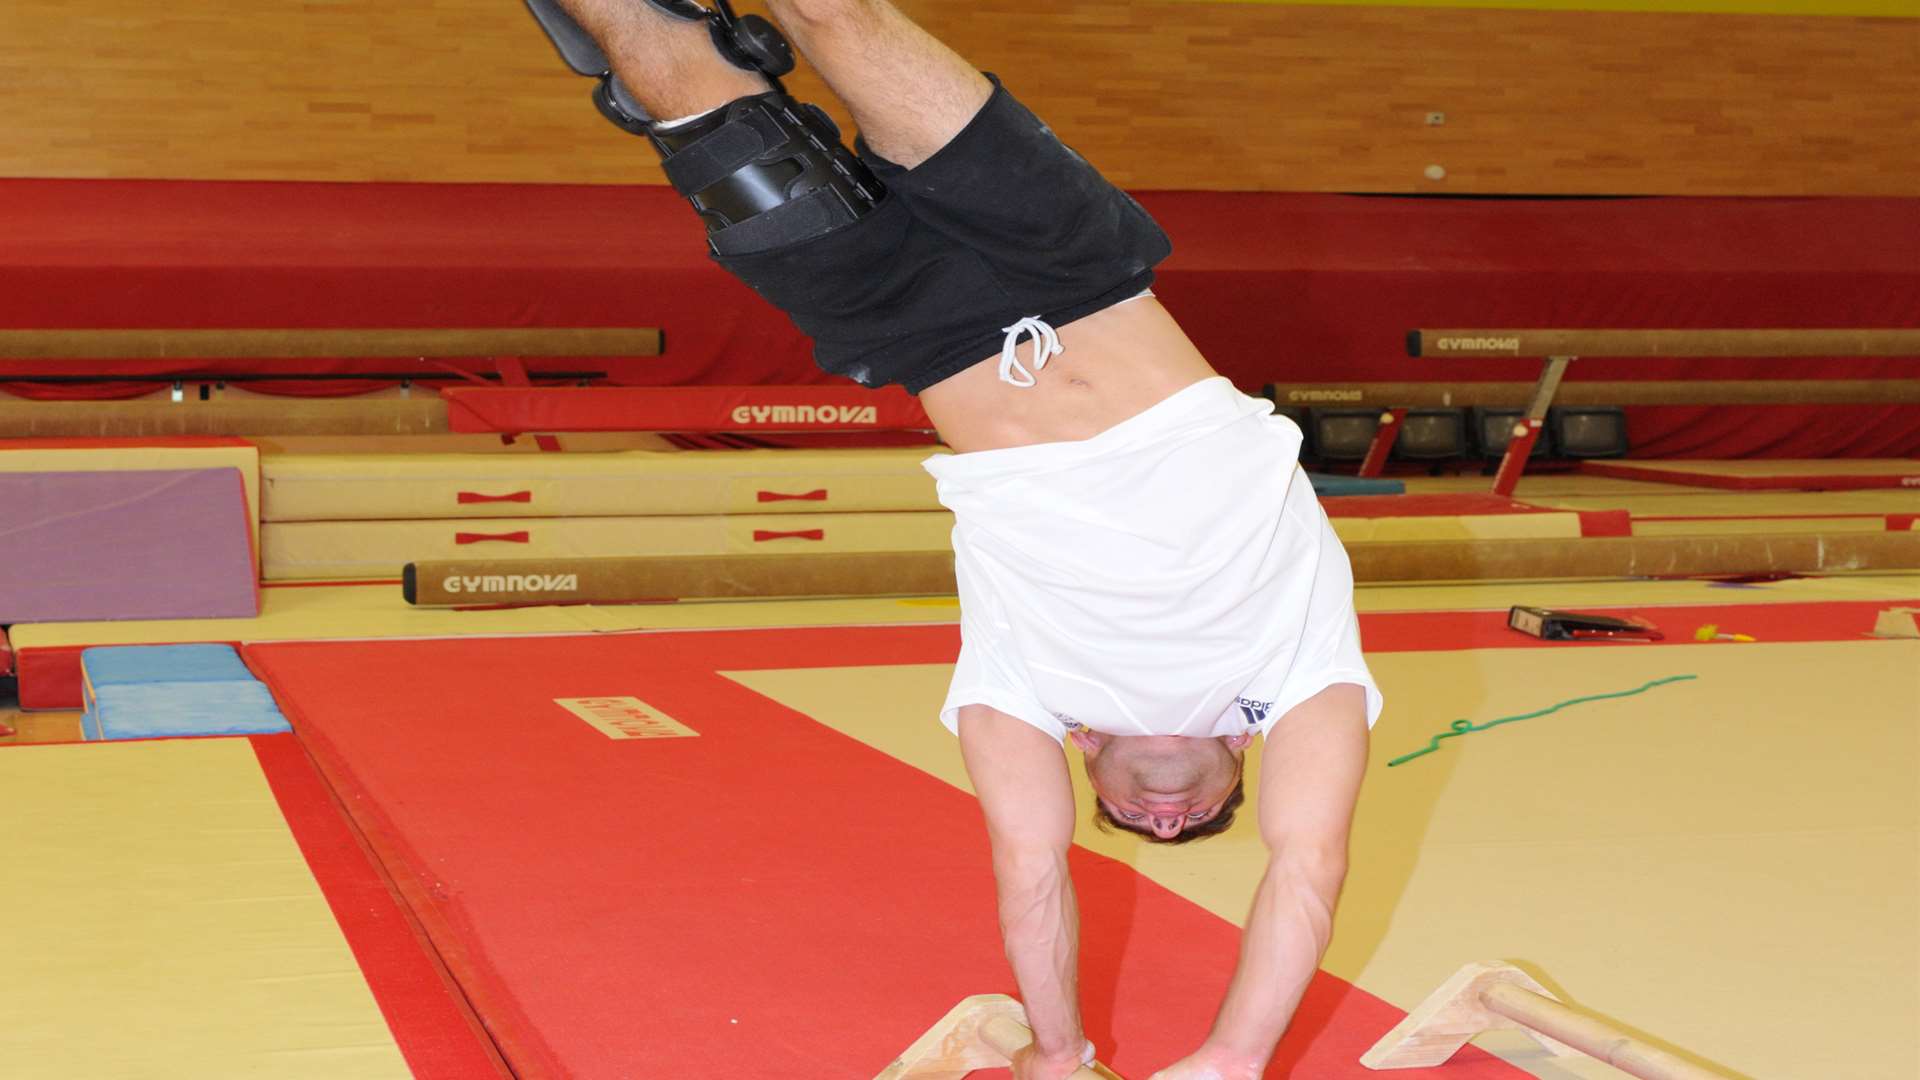 Giarnni makes a handstand in a leg brace seem easy.